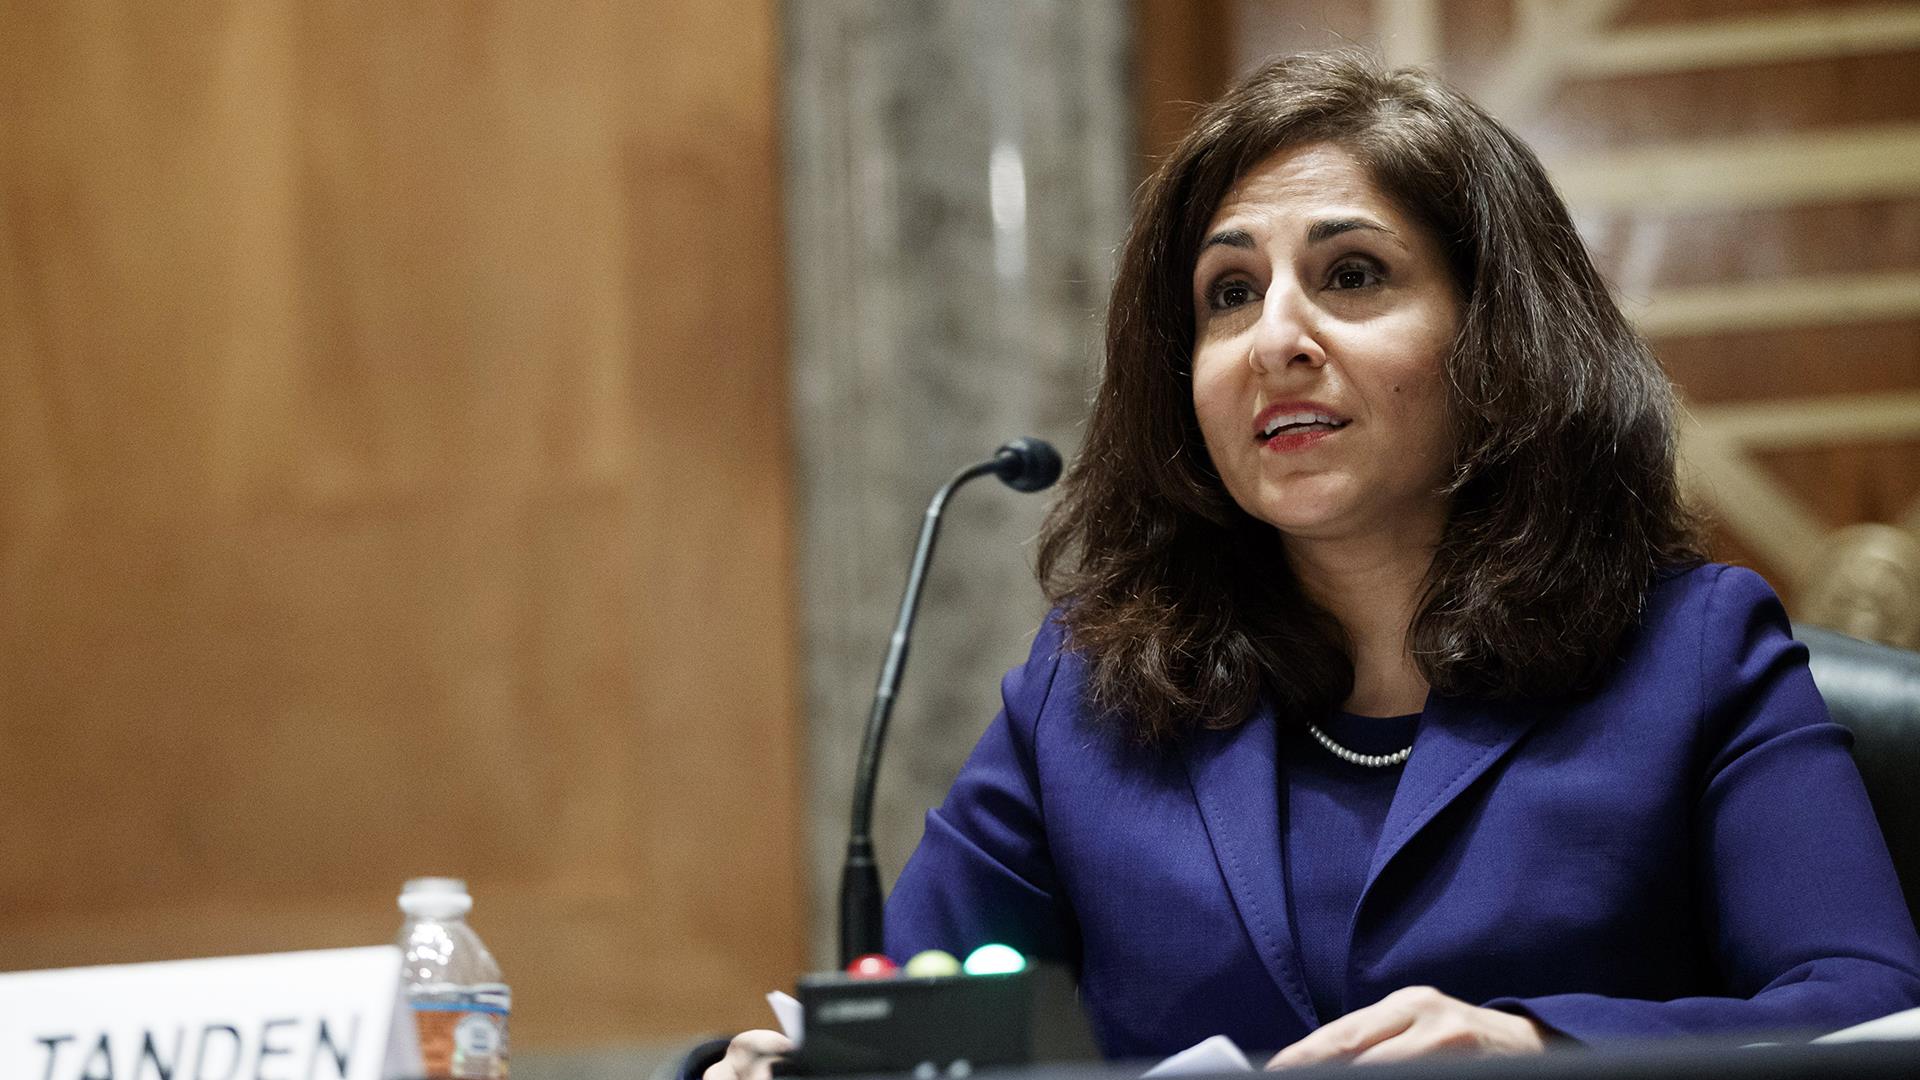 The US administration has appointed Indian-American Neera Tanden as a senior adviser to President Joe Biden at White House.